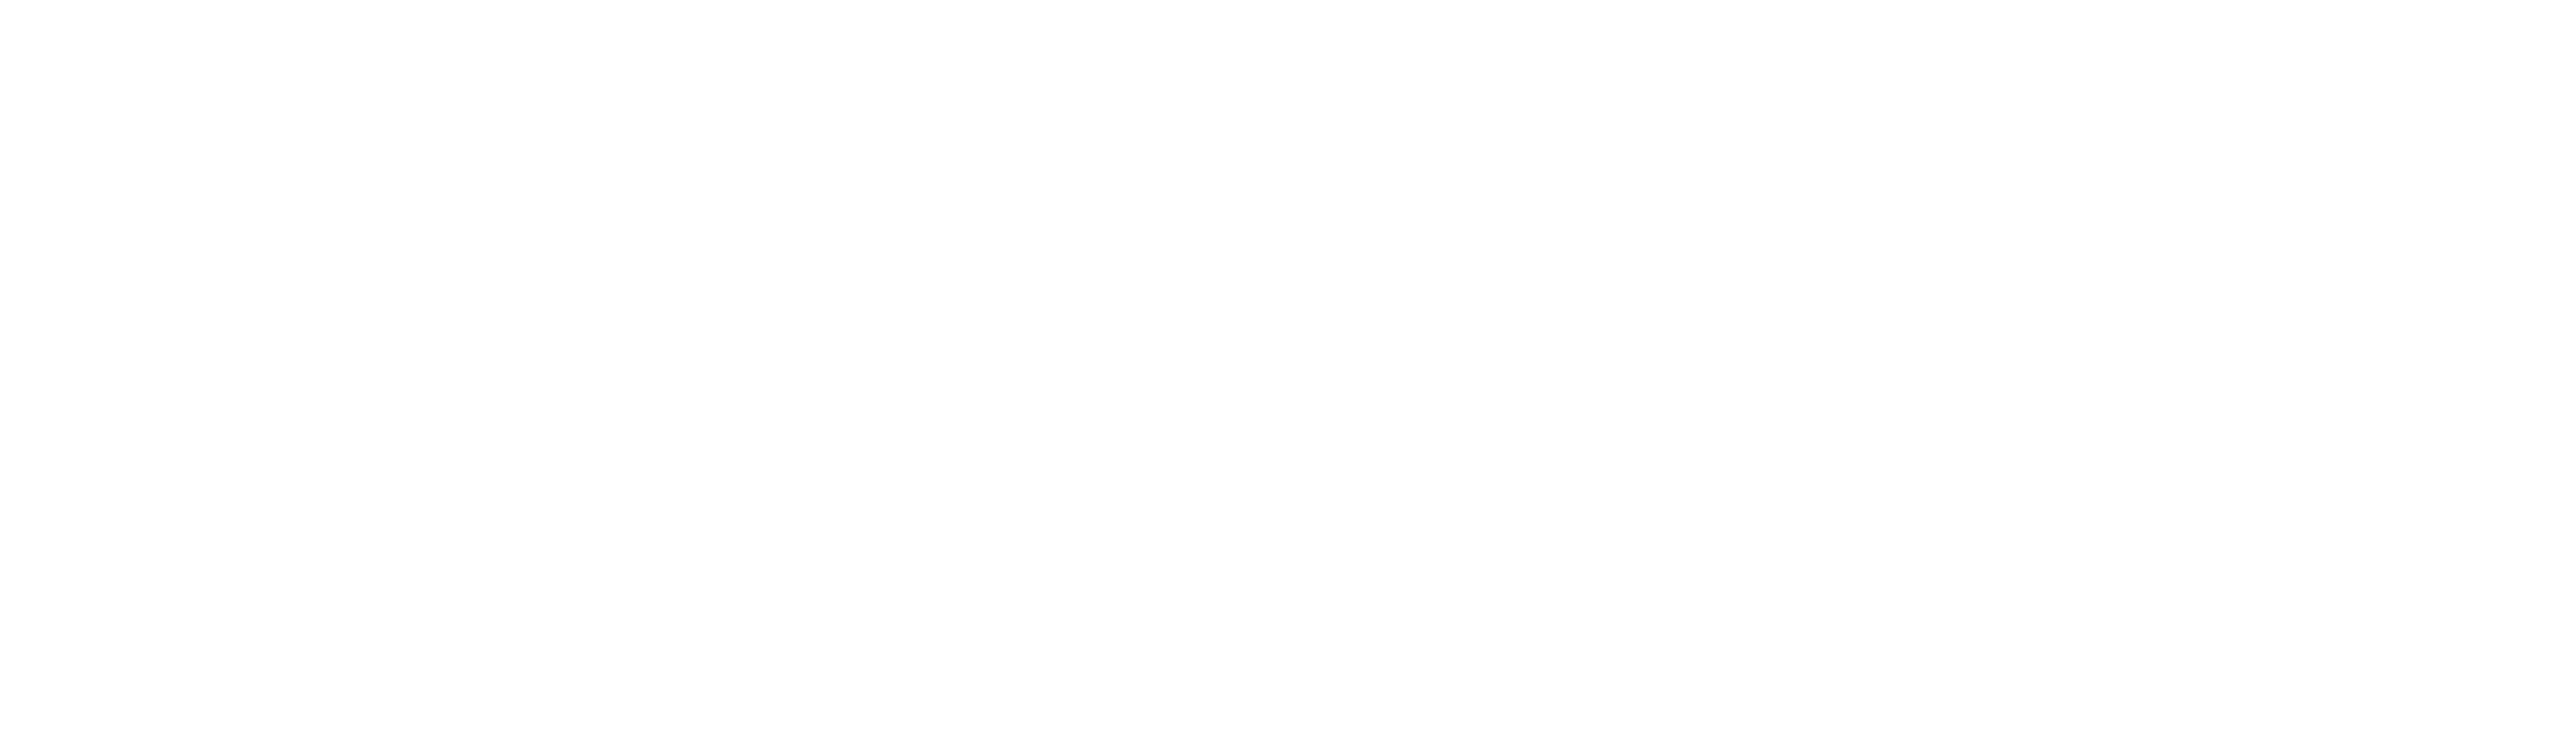 logically facts logo